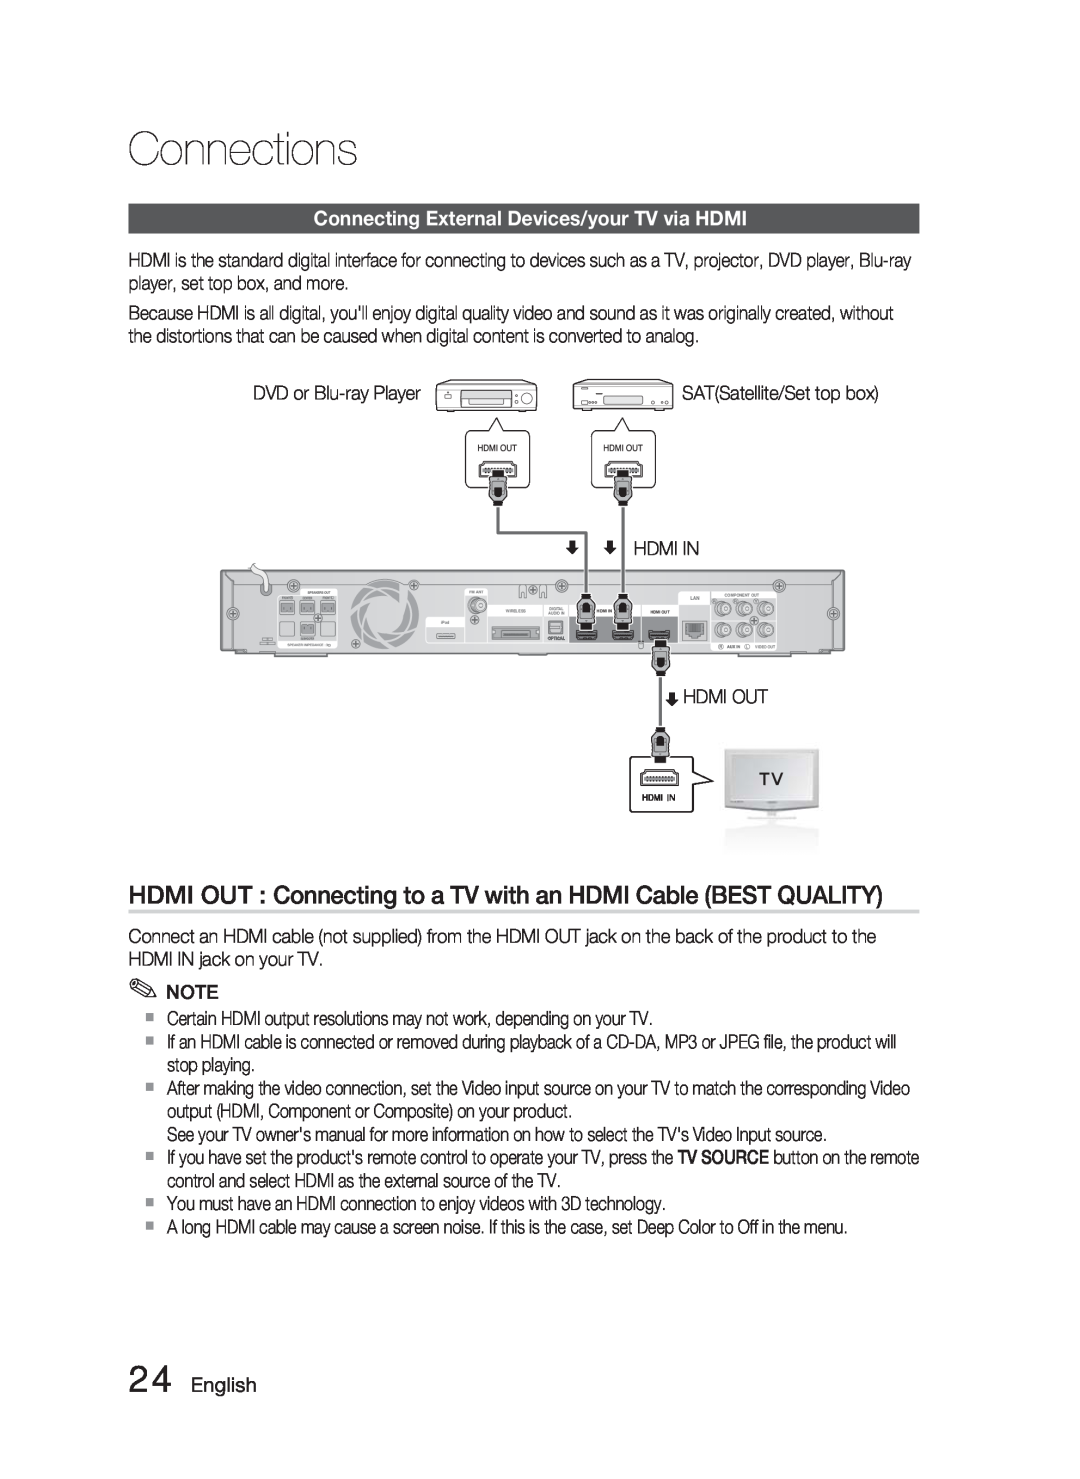 Samsung HT-C6900W user manual Connecting External Devices/your TV via HDMI, English, Connections 